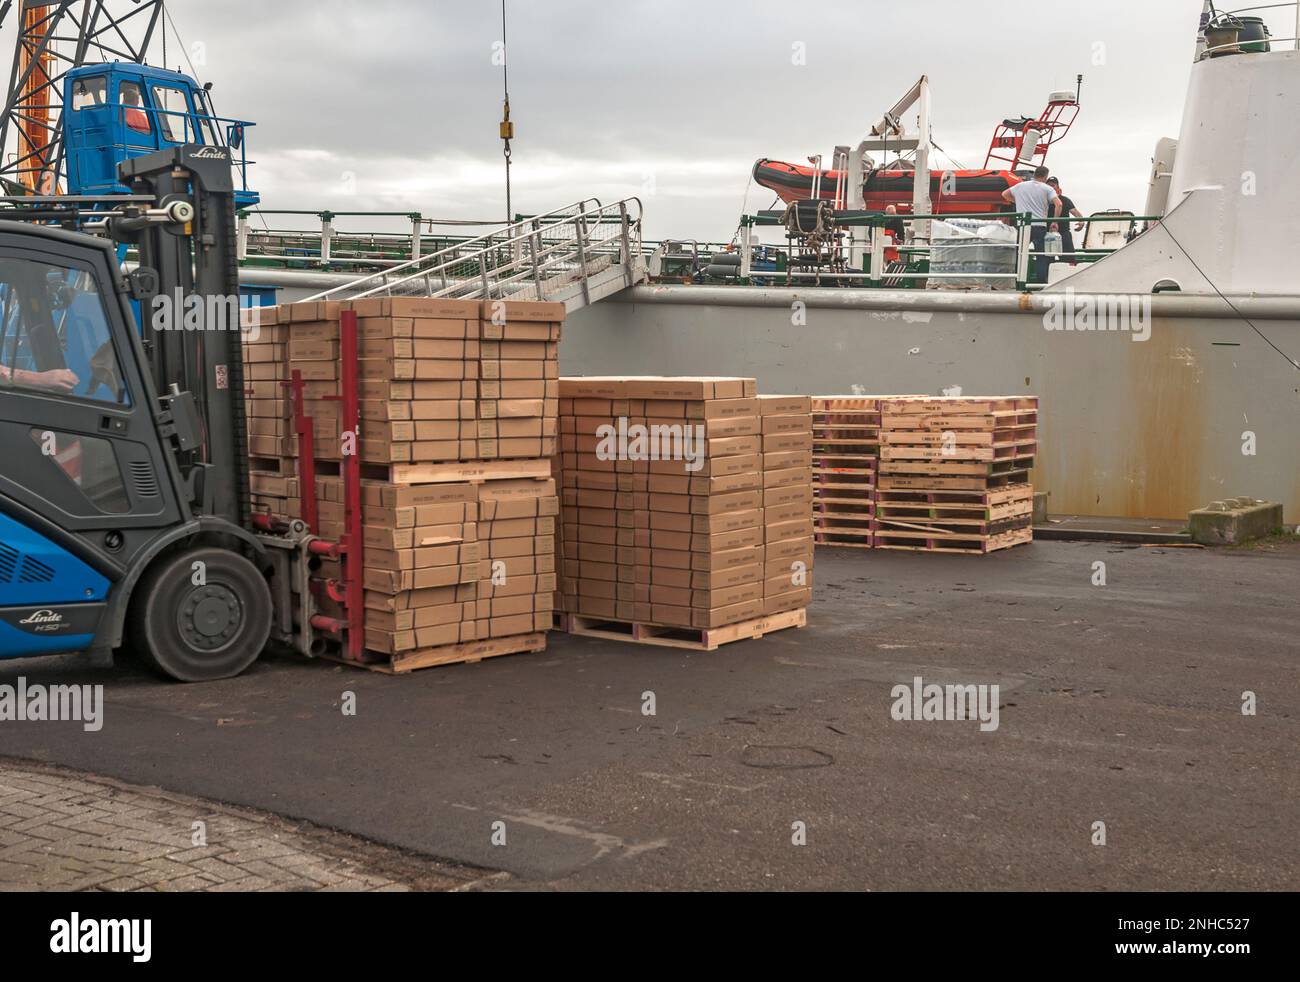 forklift loaded with frozen packs of fish on the quay Stock Photo